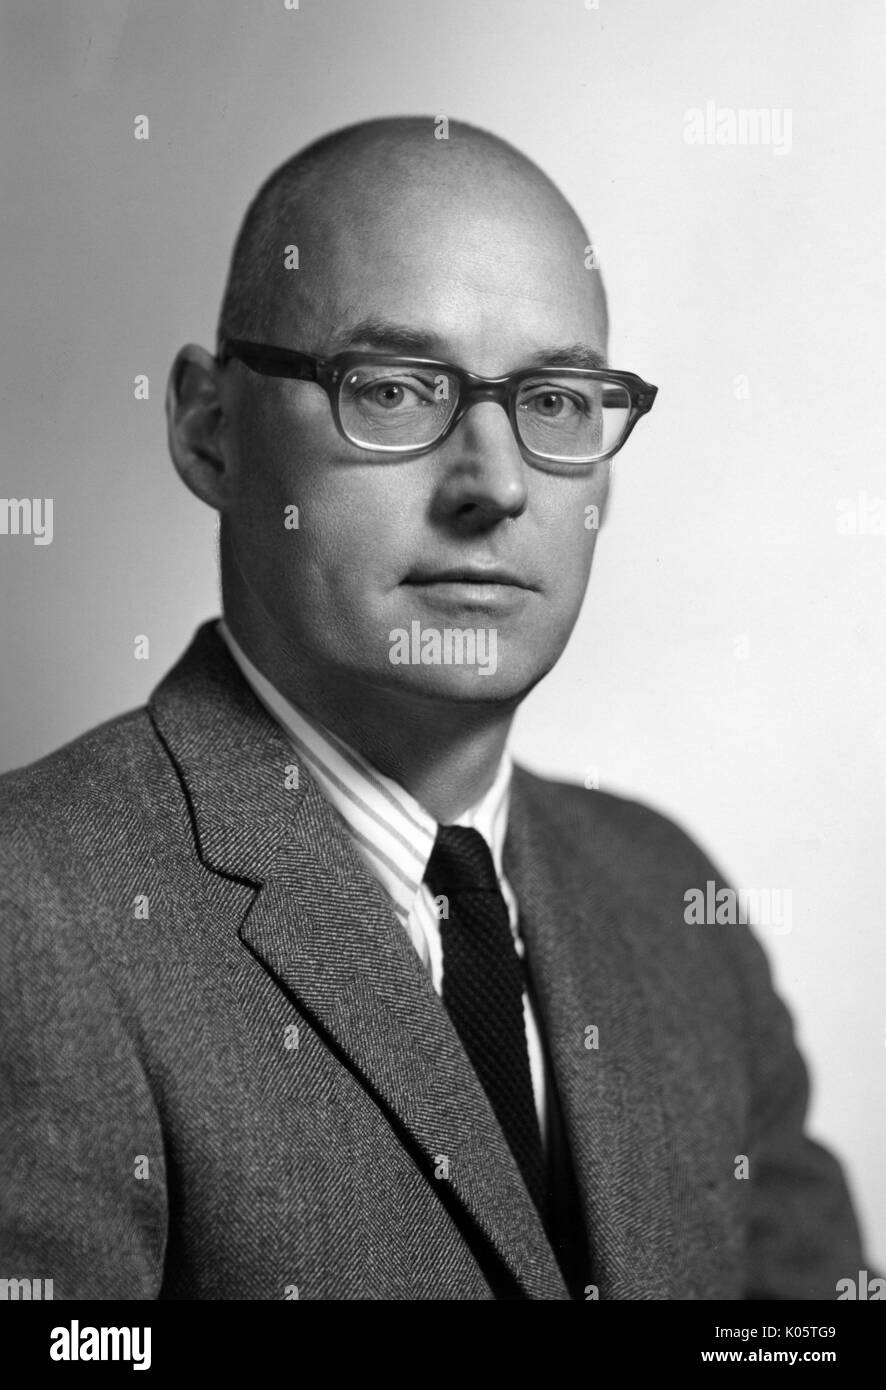 Half-length portrait of American historian of science Dr Charles C Gillispie, wearing a dark suit and a dark tie with a striped shirt, with a serious facial expression, wearing dark glasses, posed in front of a backdrop, 1965. Stock Photo